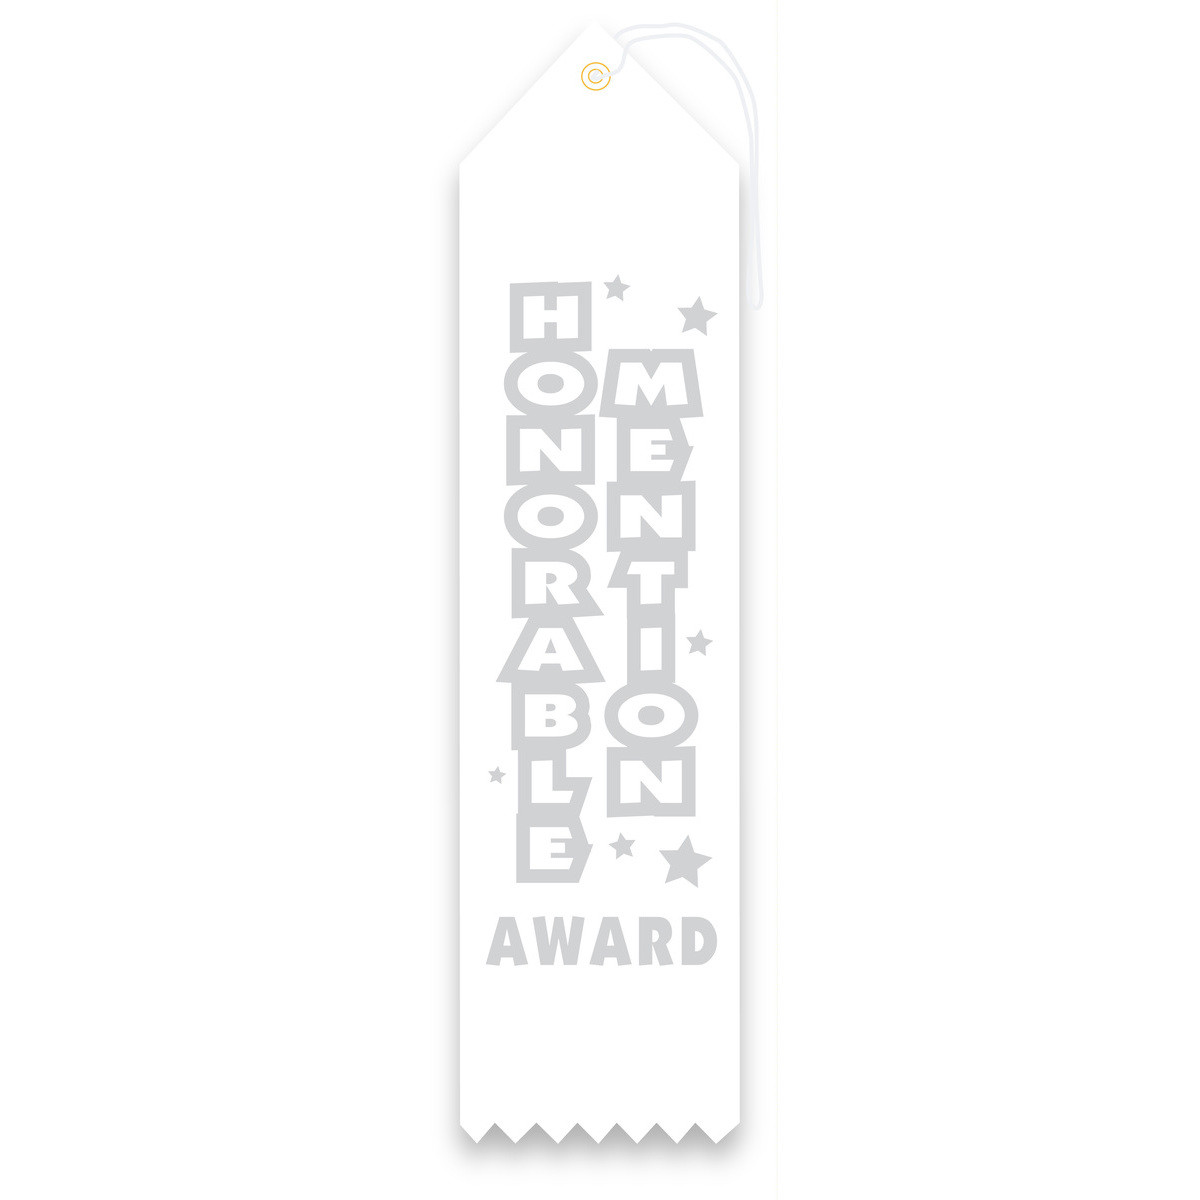 Carded Ribbon - Honorable Mention Award